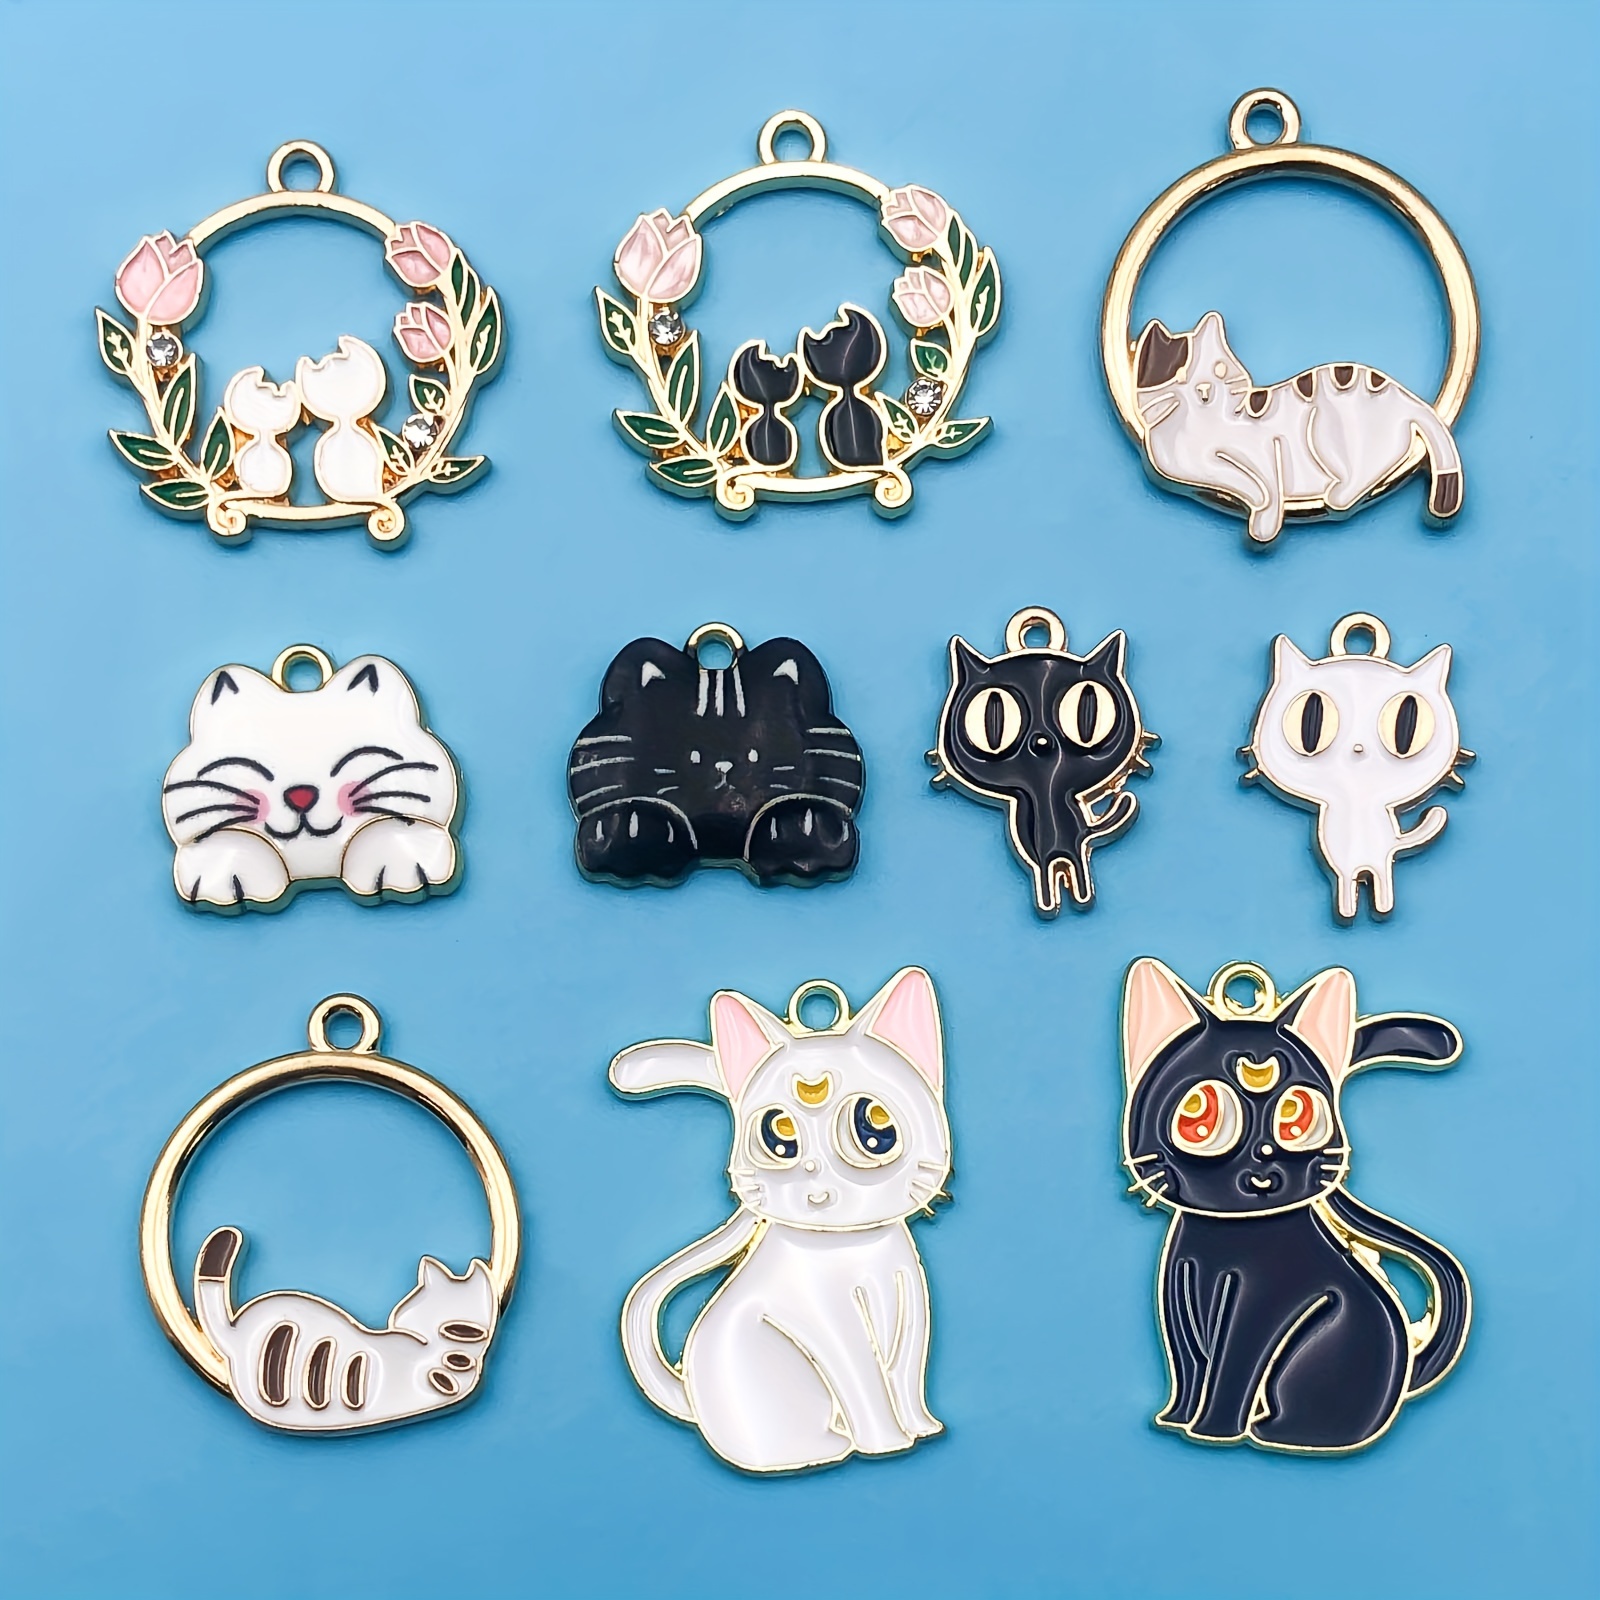 10pcs/set Exquisite Cute Cartoon Animal Cat Charms, Enamel Alloy Pendants  For Jewelry Making, Earring Bracelet Necklace DIY Crafting Jewelry Accessori